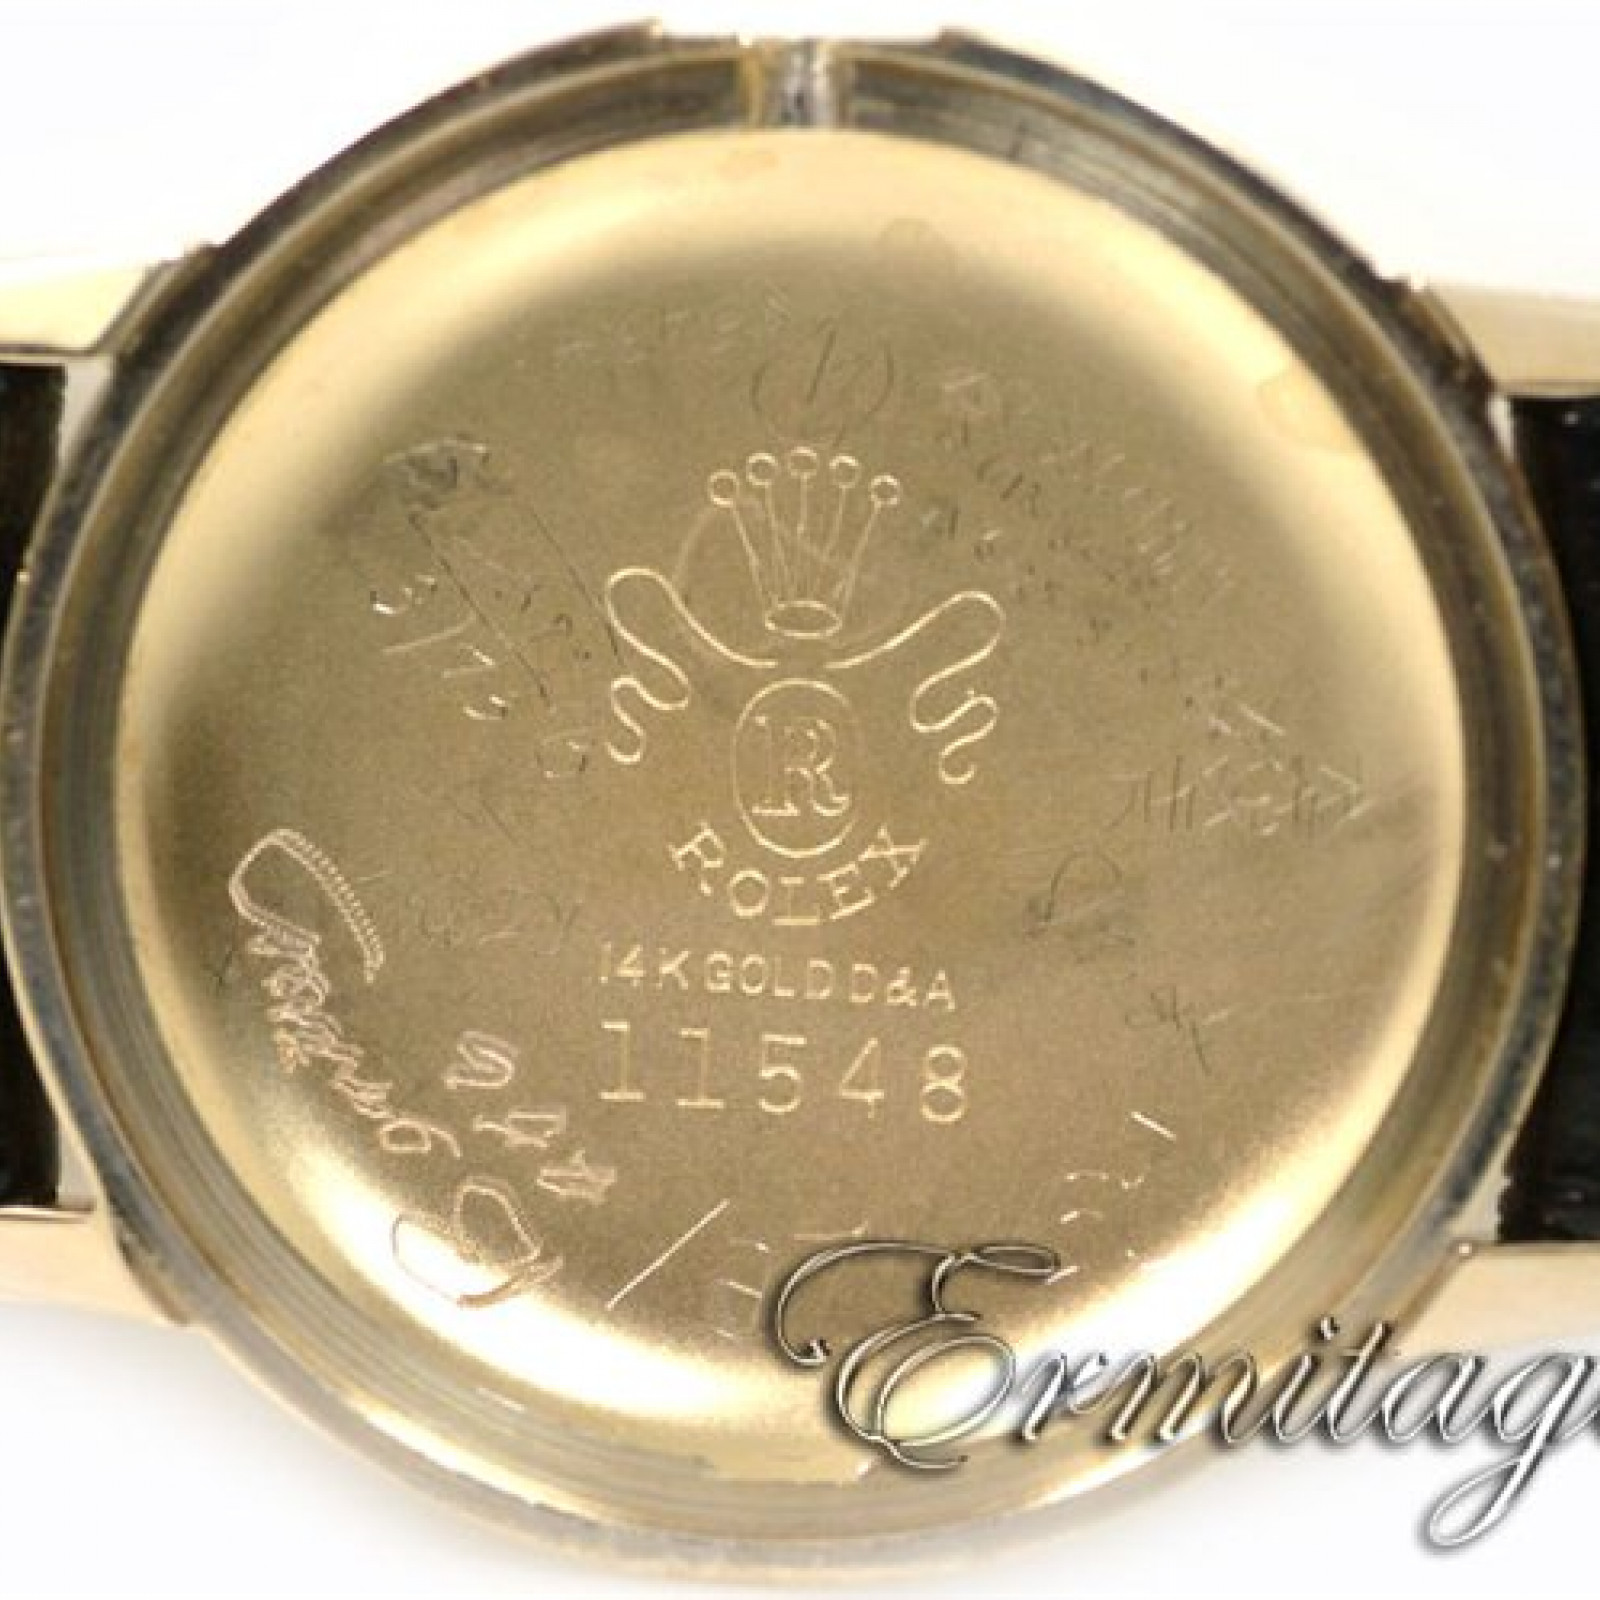 Pre-Owned Rolex Oyster Perpetual 11548